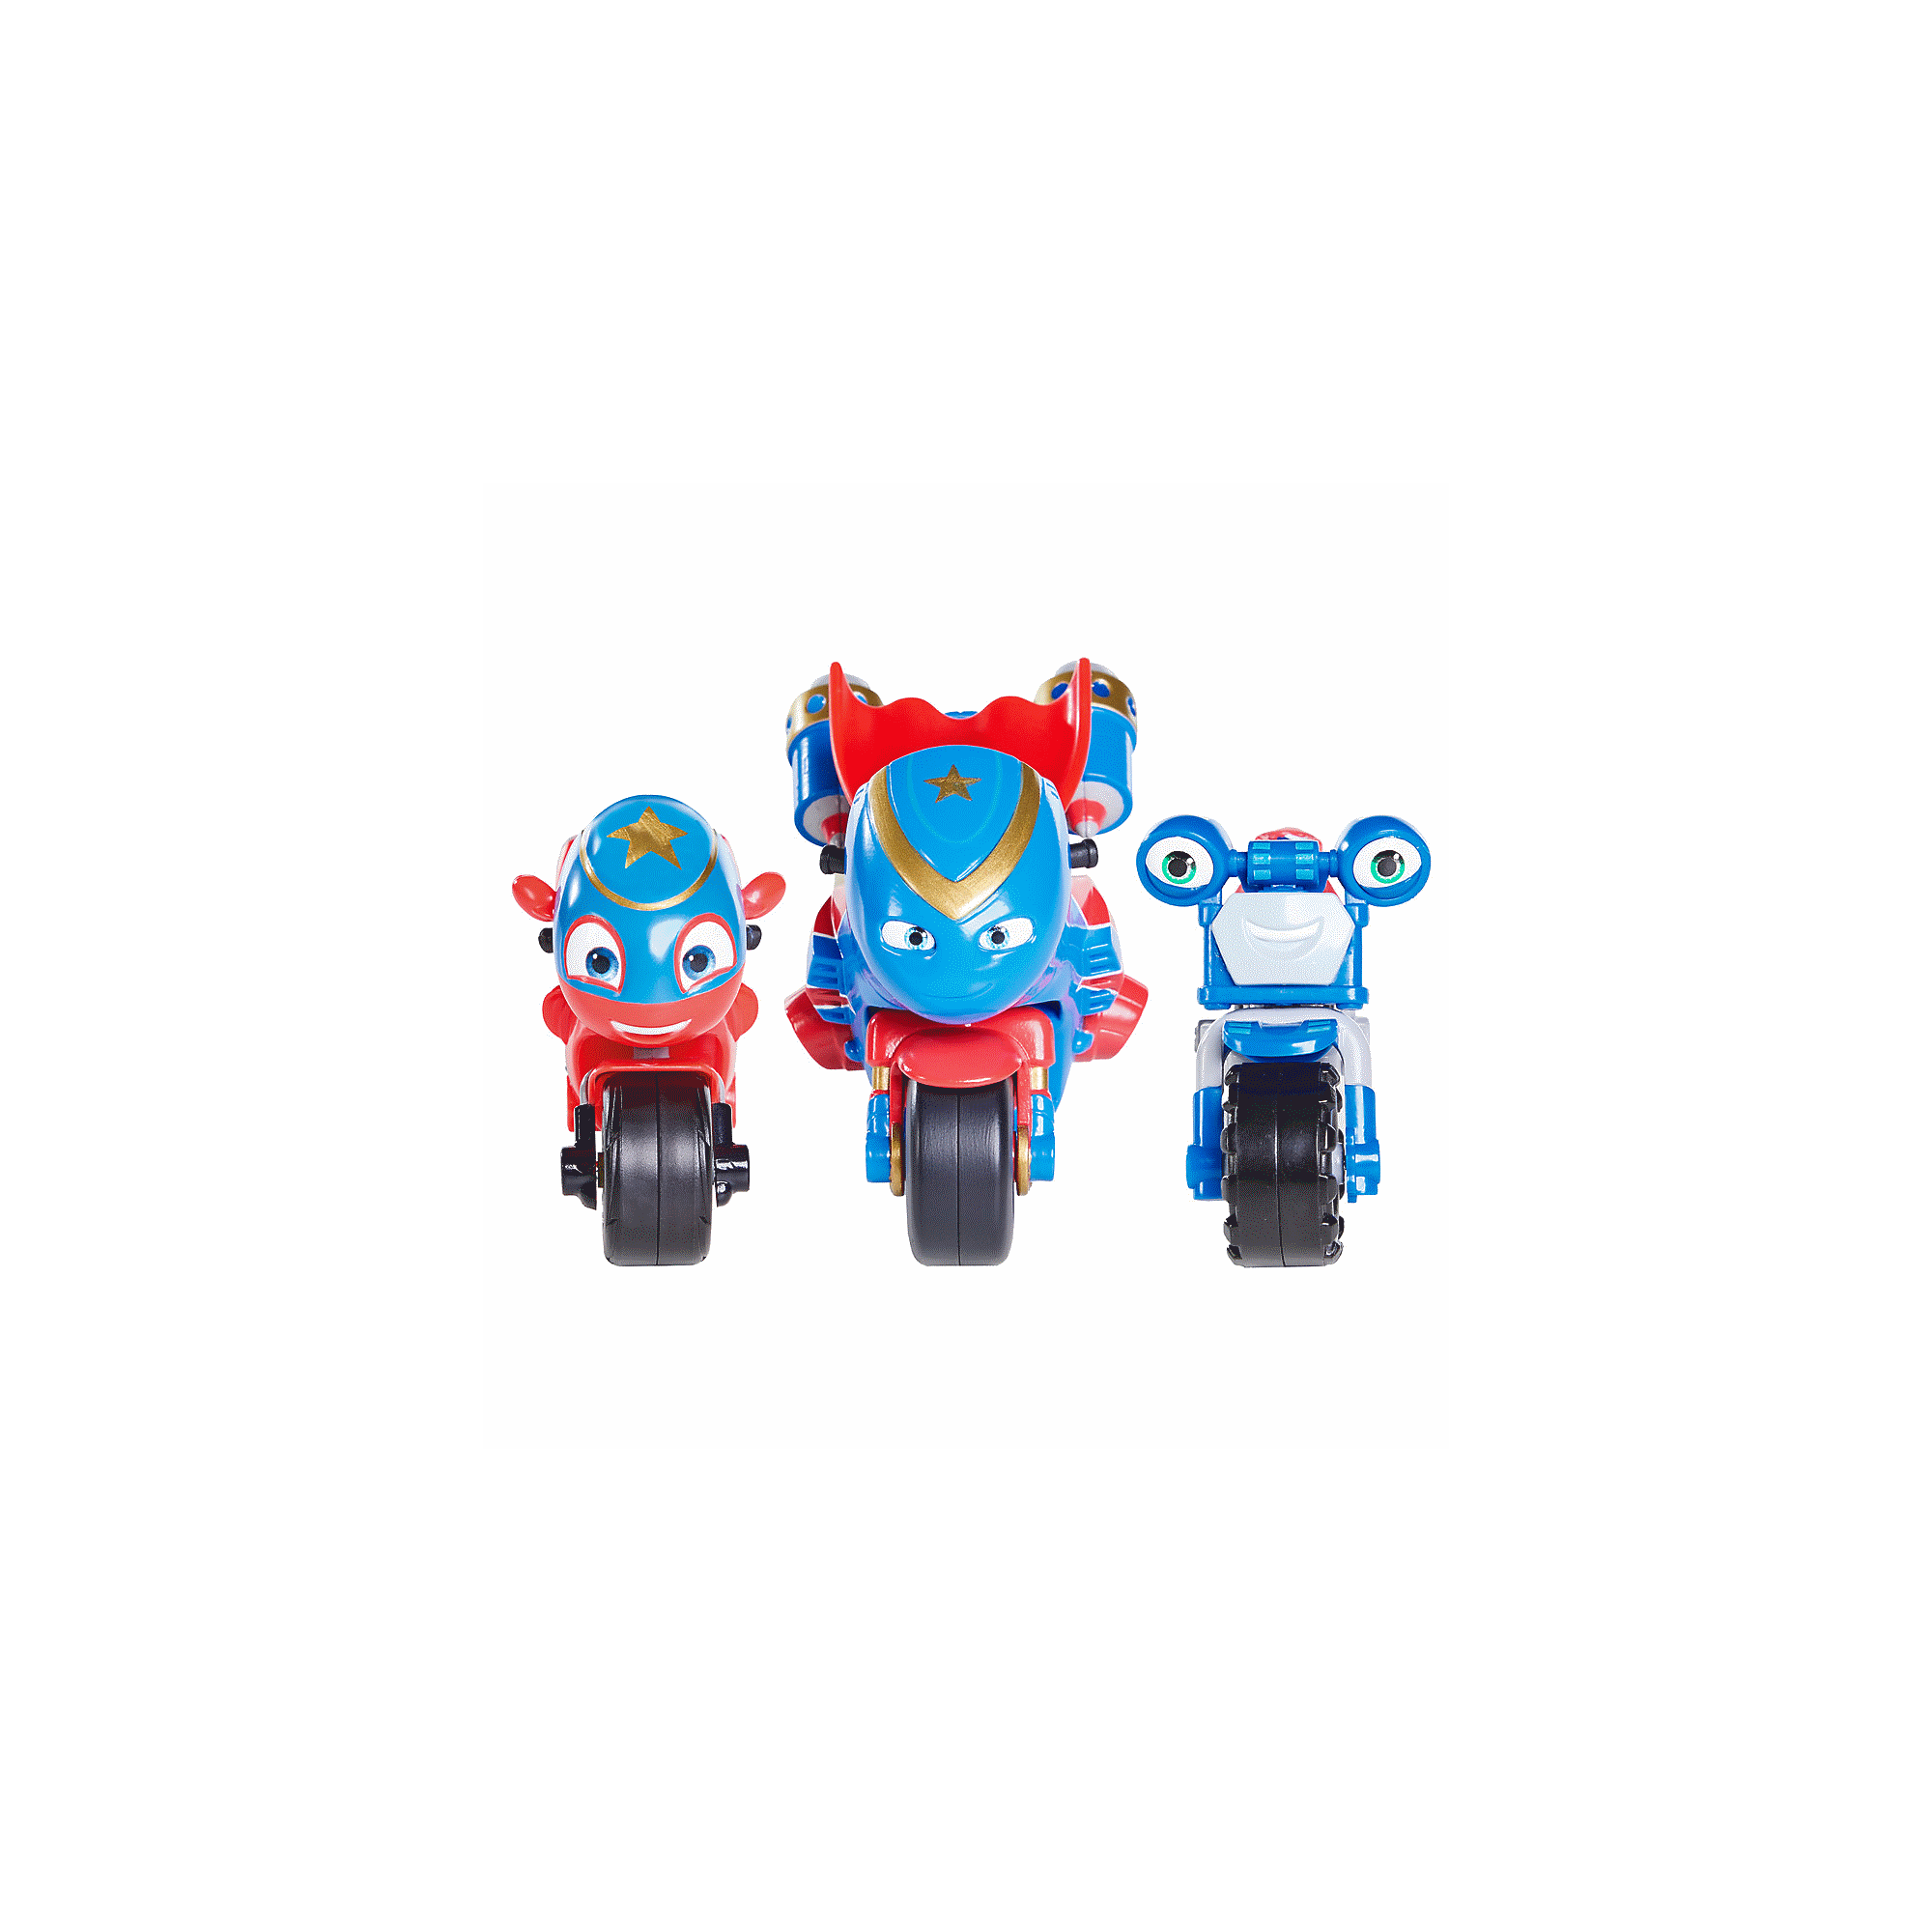 Ricky Zoom Hank, Maxwell & The Bike Buddies Motorcycle Toys (Set of 3)